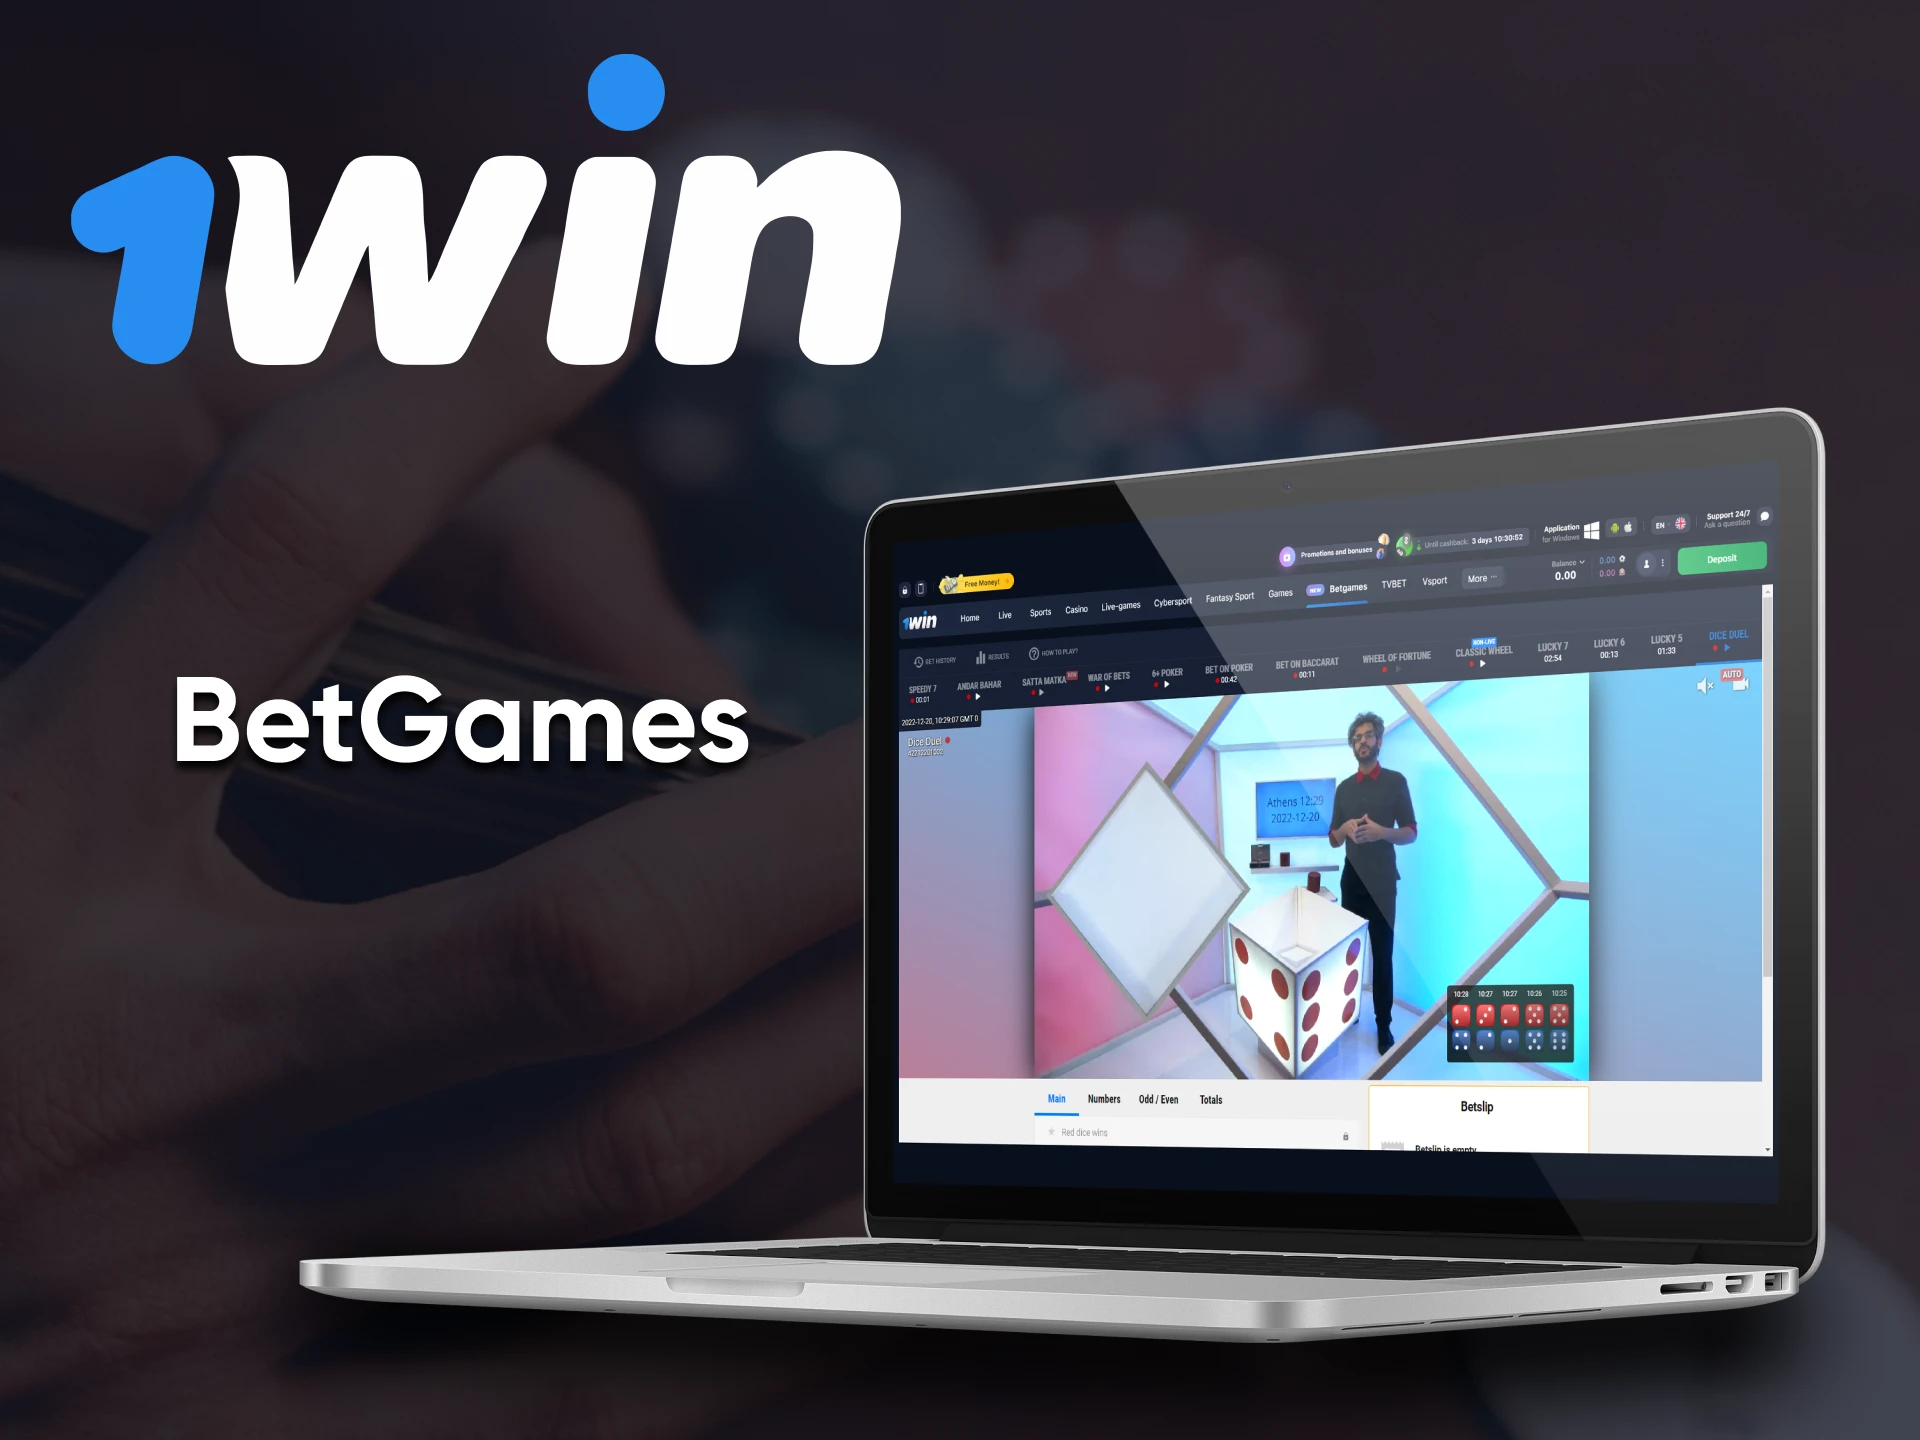 For games on 1win you can choose the BetGames.